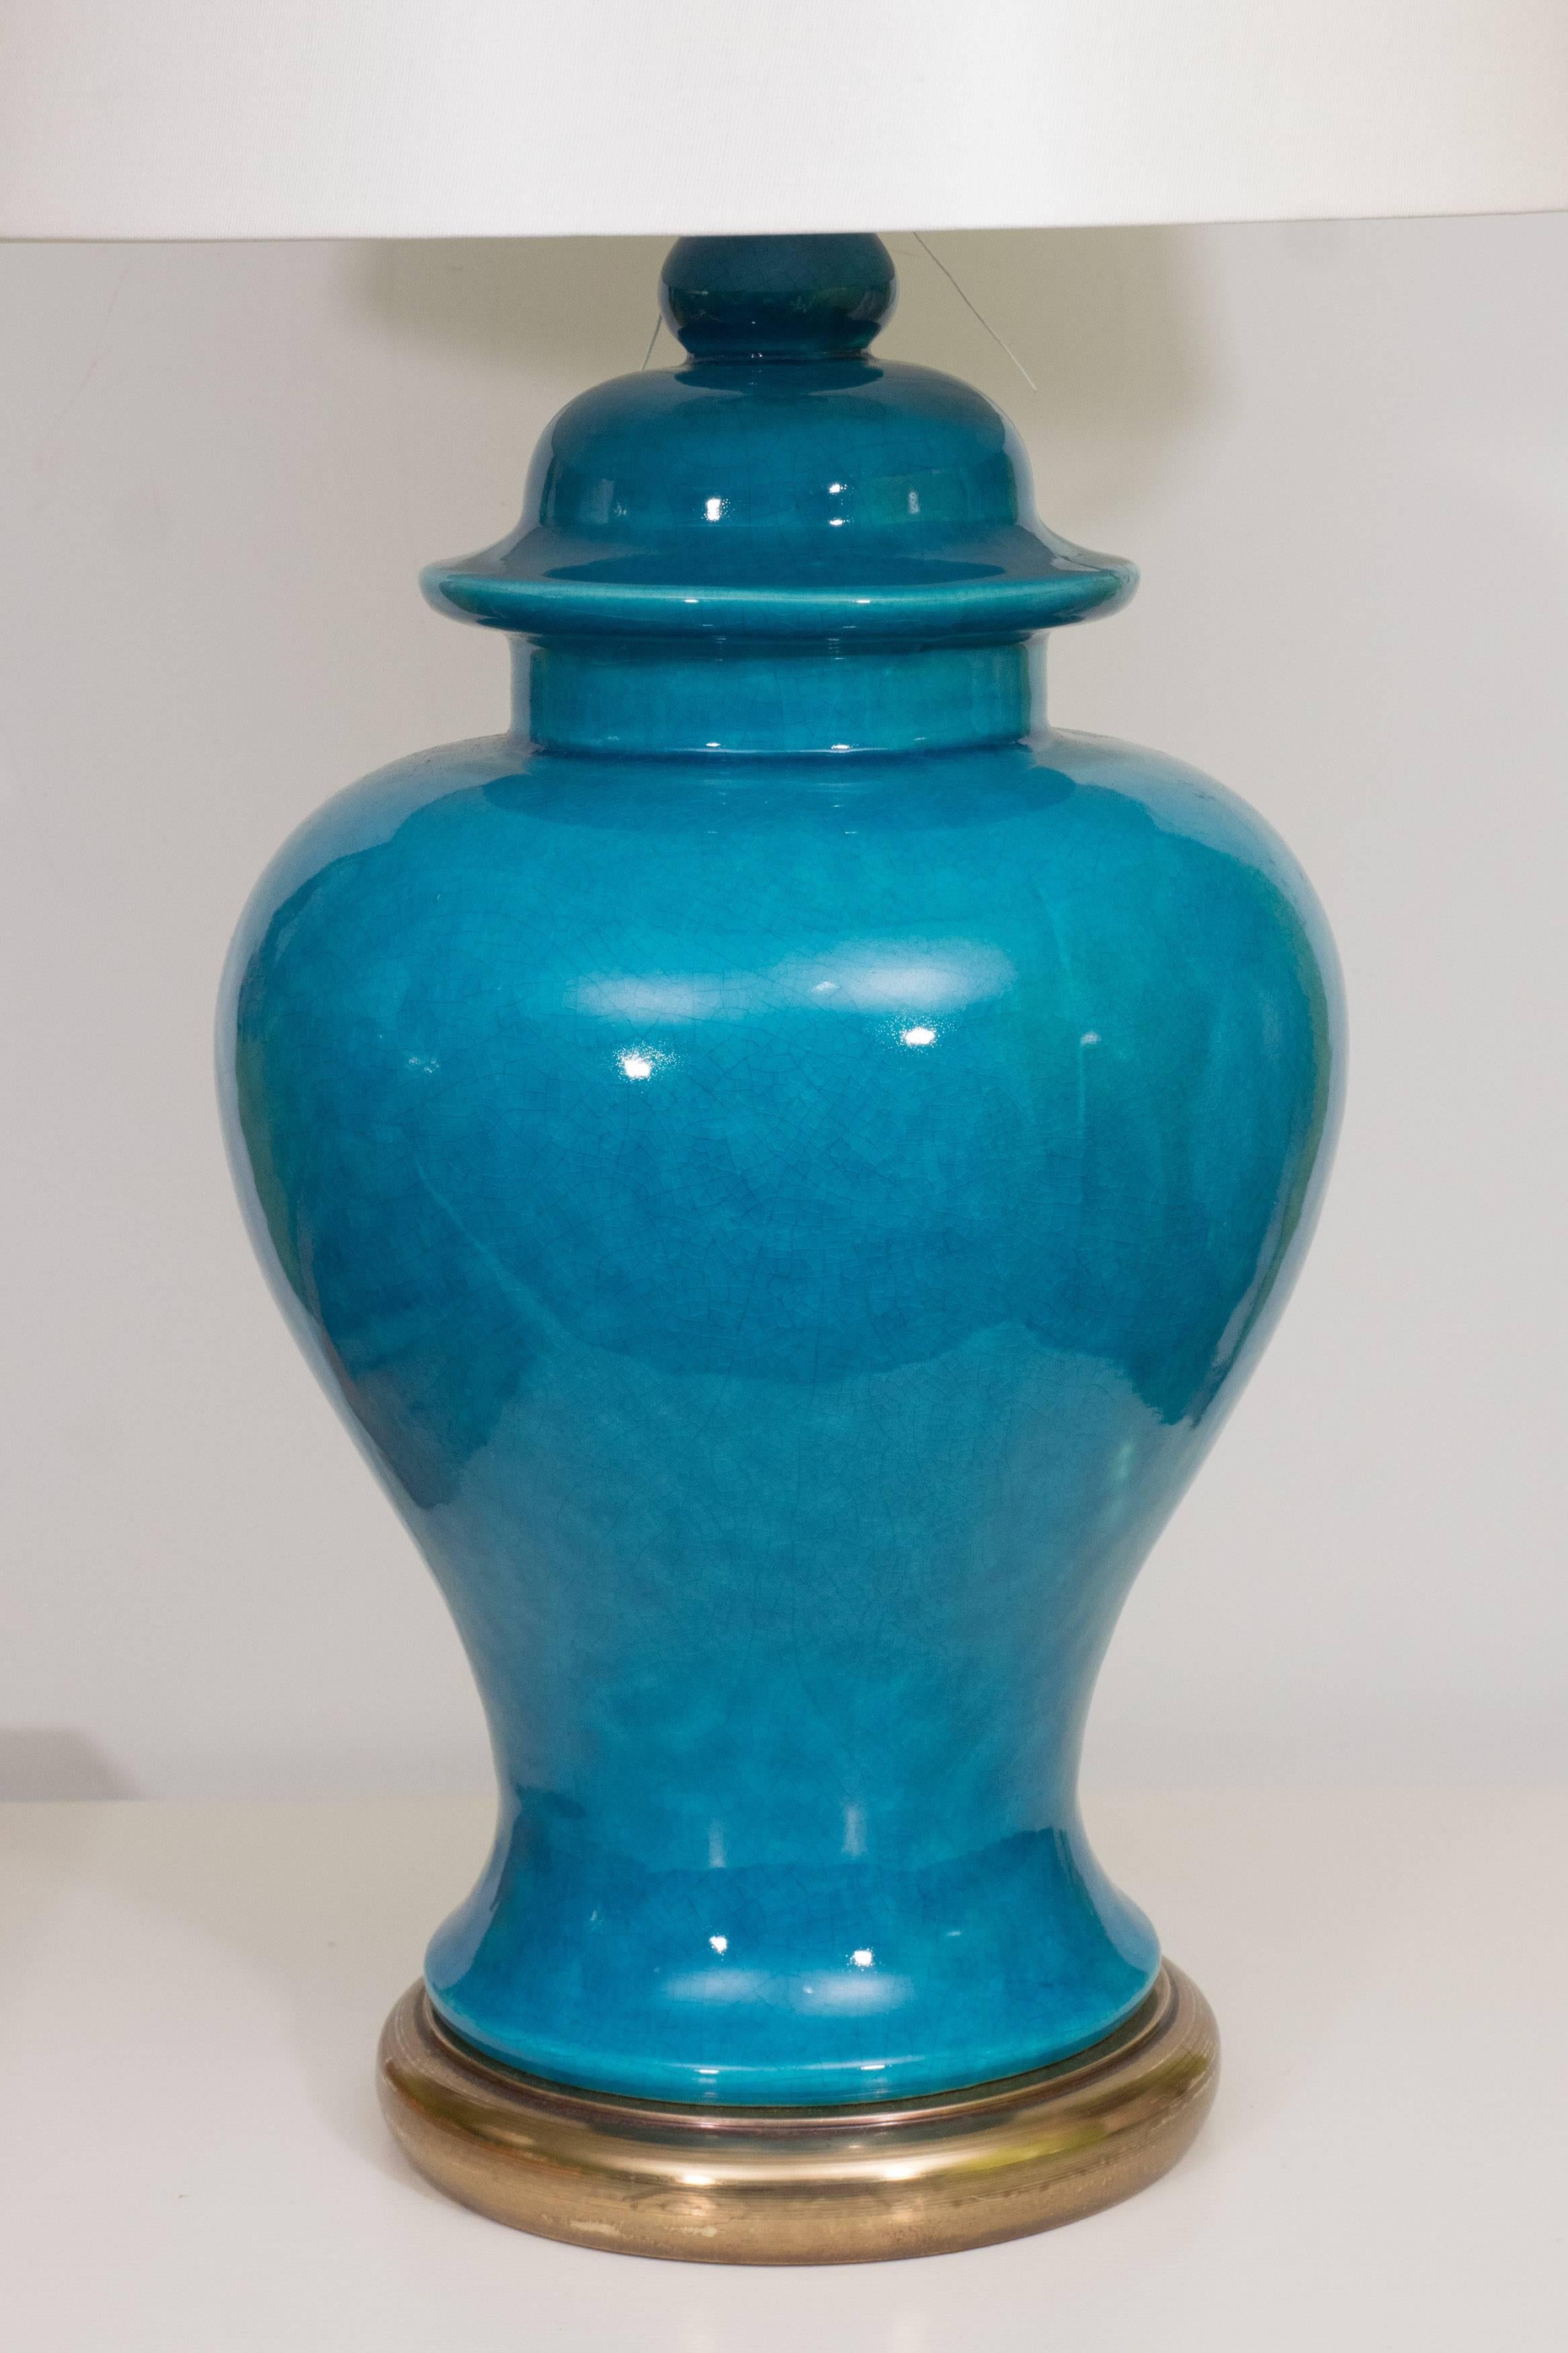 A stunning pair of ceramic urn lamps in a beautiful shade of blue on a brass base with cream colored drum shade.